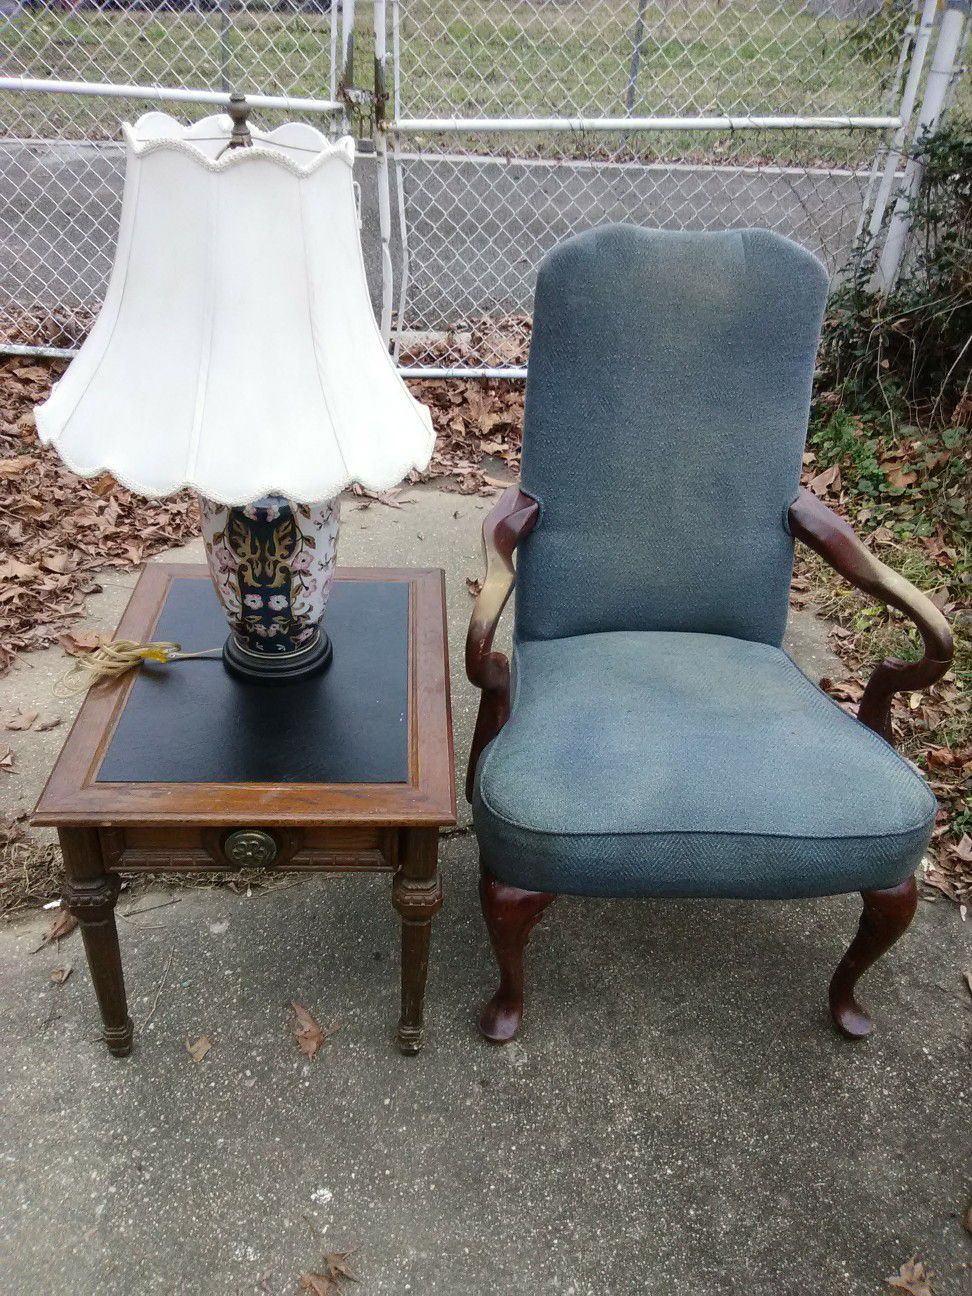 Antique lamp with shade plus table and chair